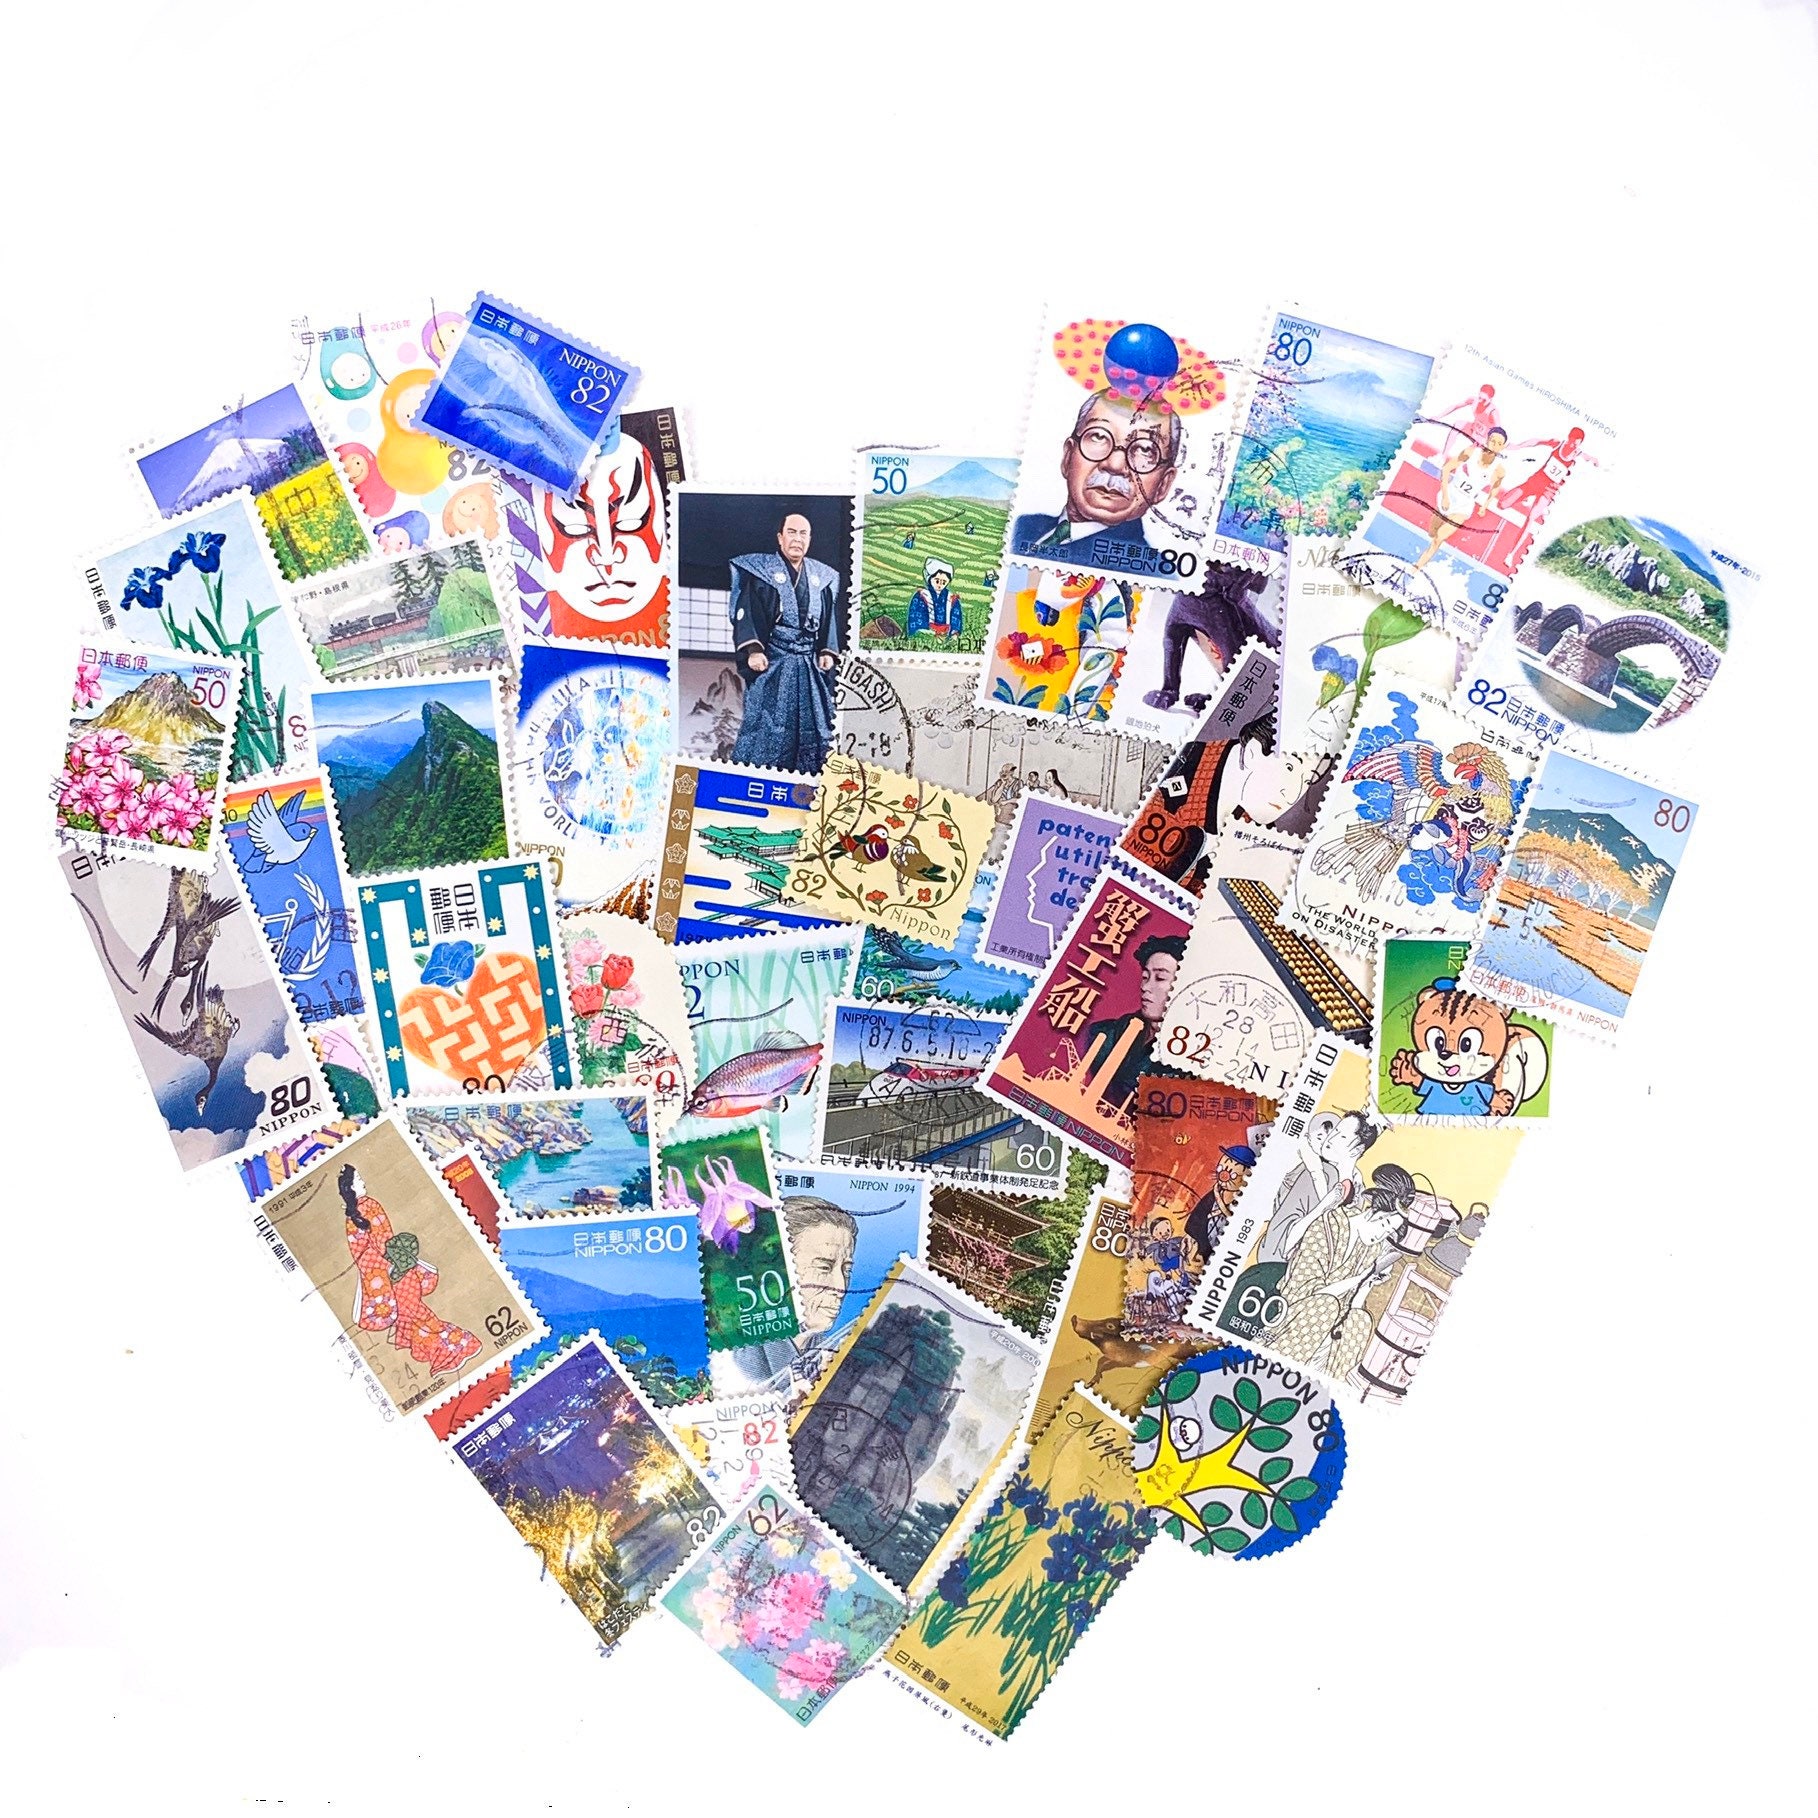 10 x Hello Kitty used, Japanese postage stamps all off paper - Japan - Cats  - Hearts - for card making, invites, scrapbooking, crafts